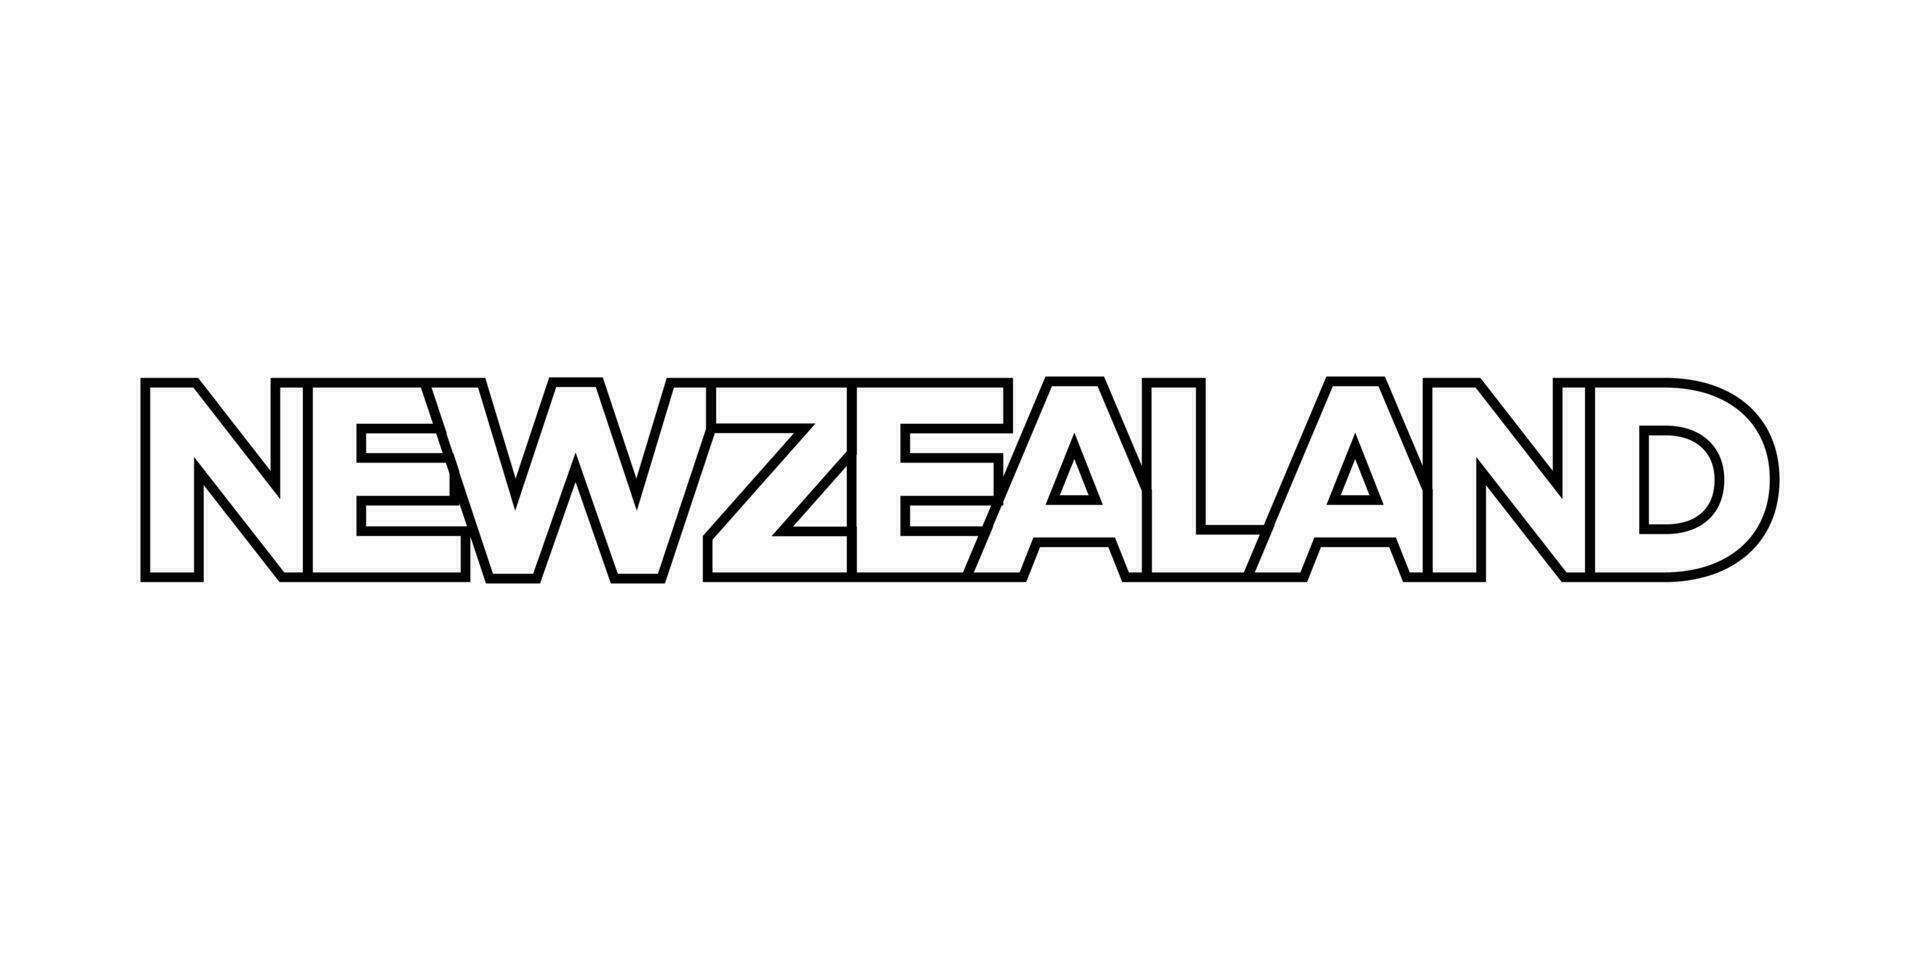 New Zealand emblem. The design features a geometric style, vector illustration with bold typography in a modern font. The graphic slogan lettering.